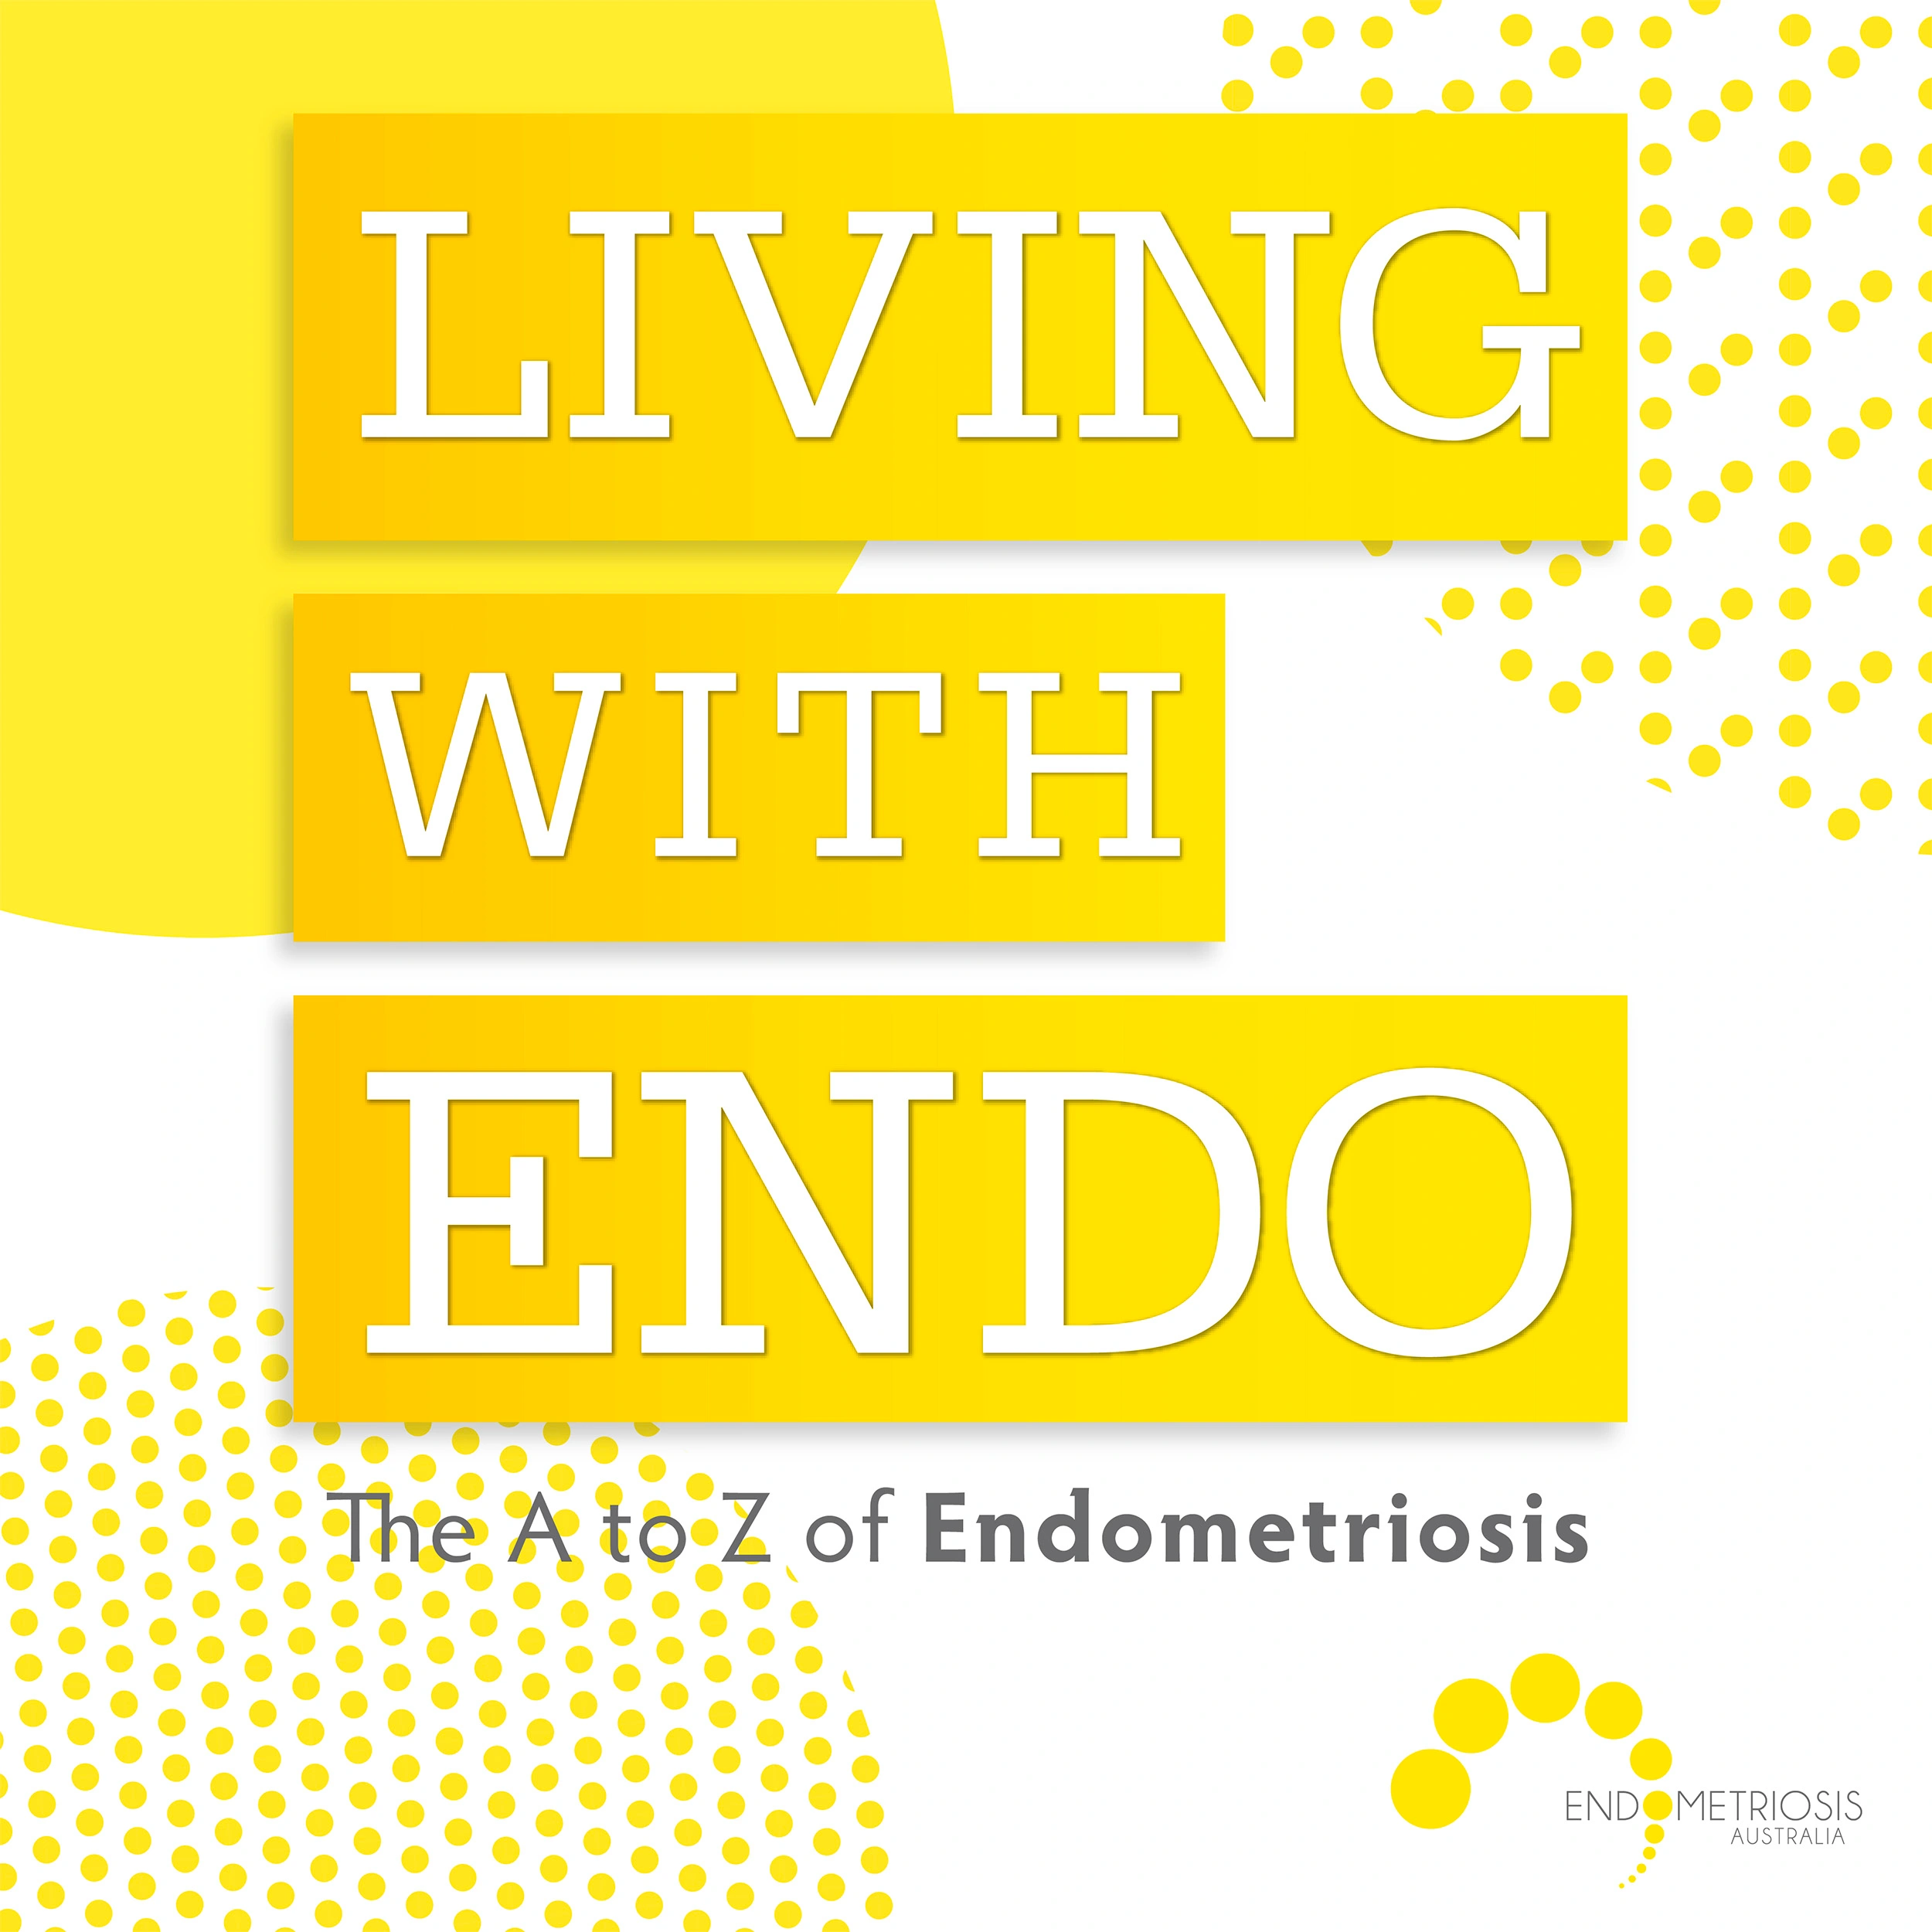 The A to Z of Endometriosis